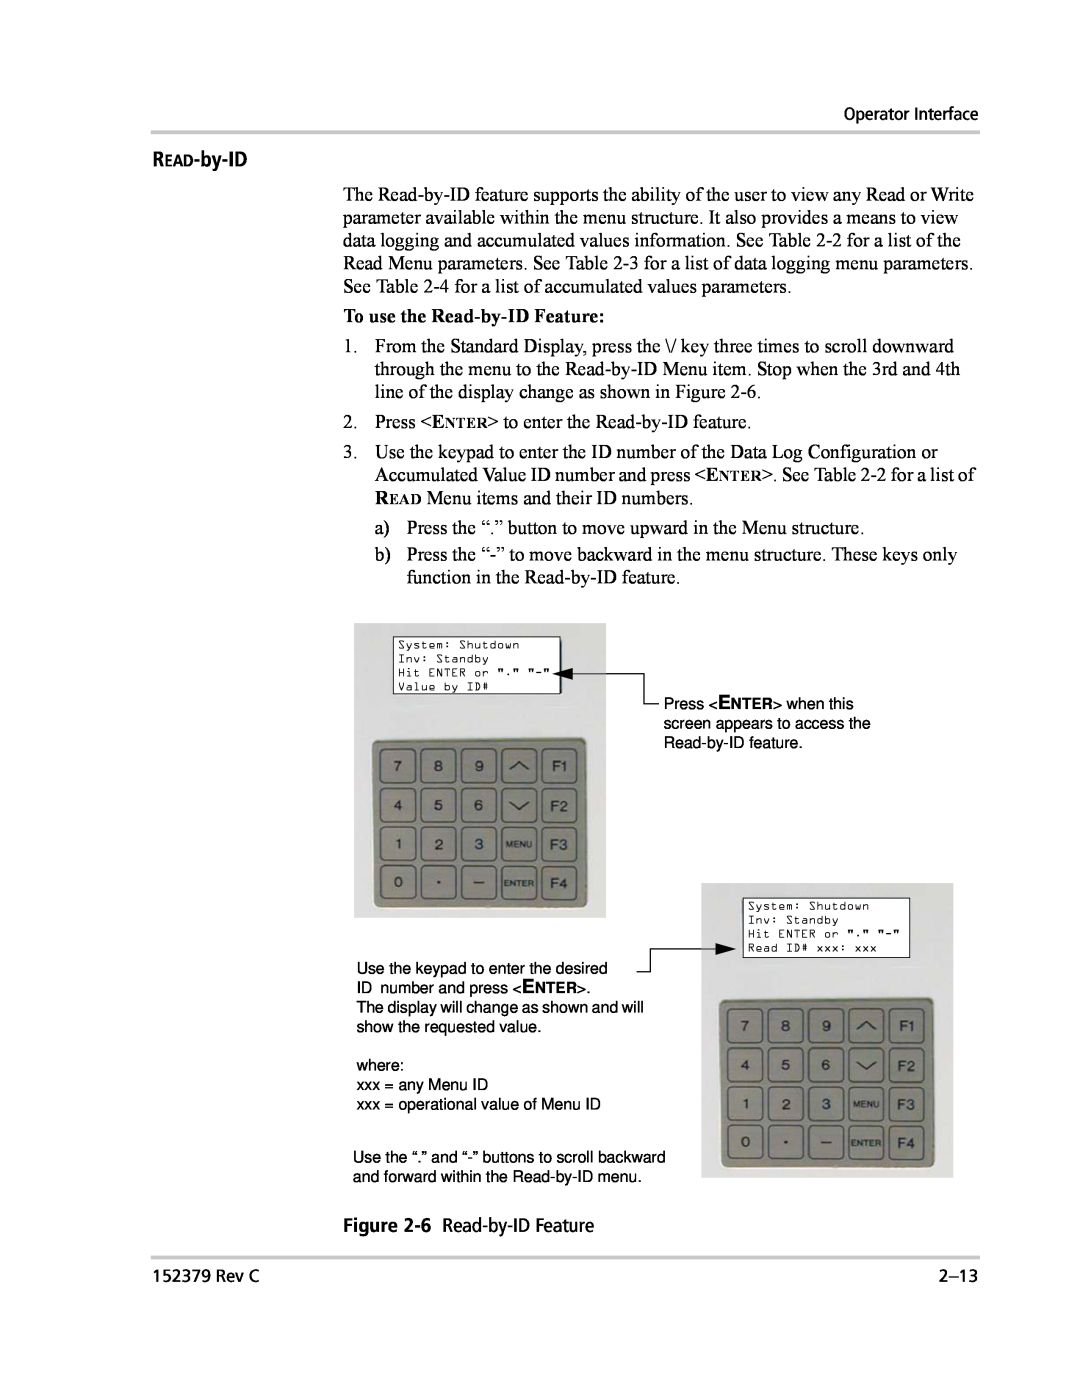 Xantrex Technology PV100S-208 manual READ-by-ID, To use the Read-by-ID Feature 